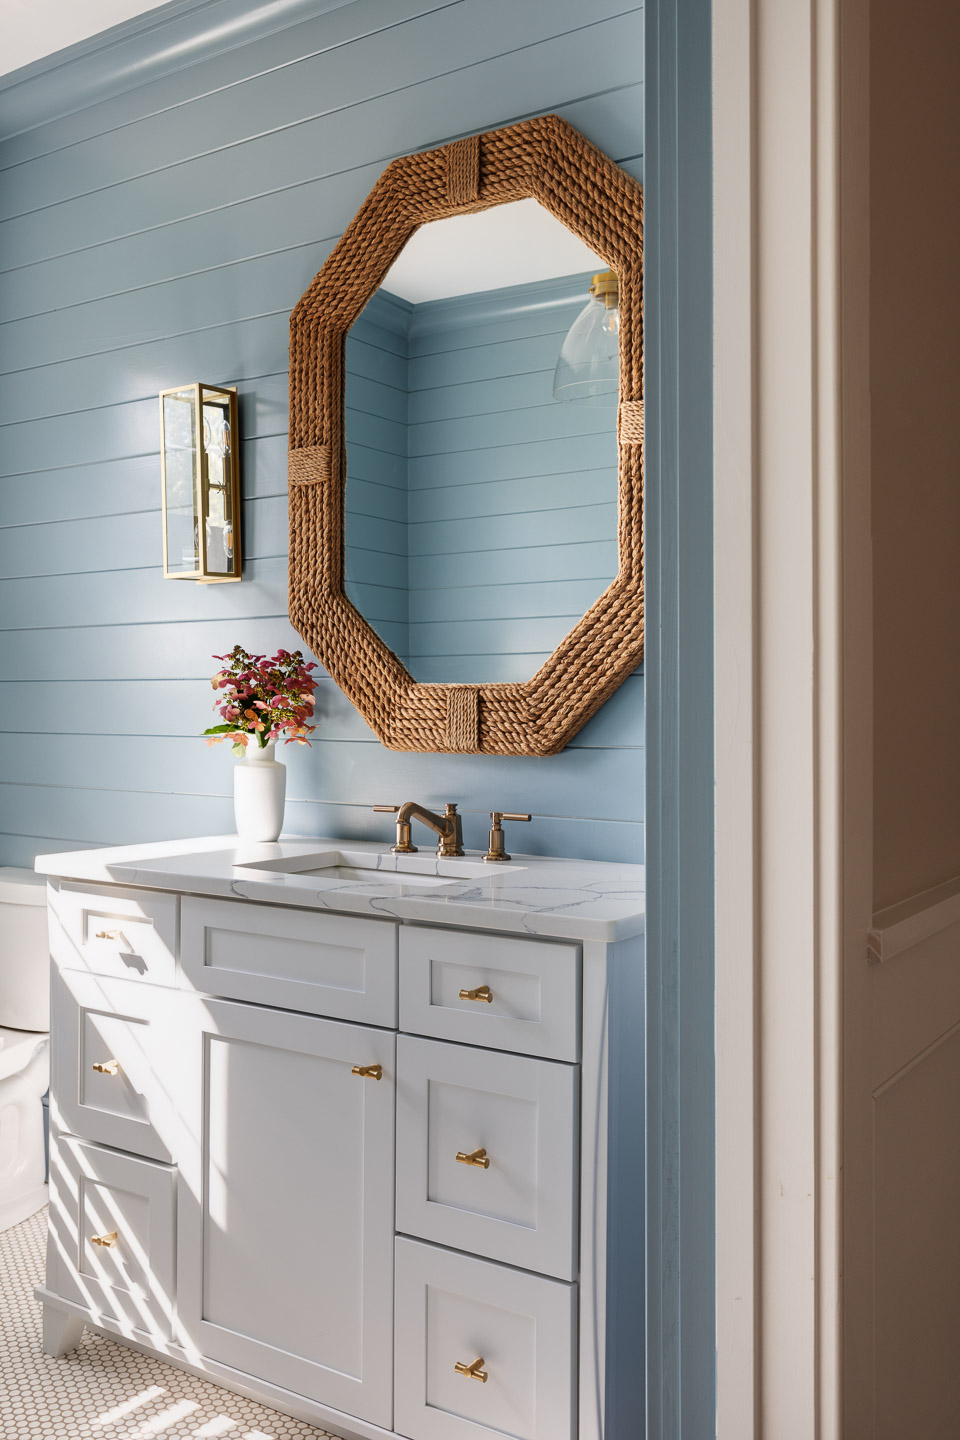 Coastal style in this bathroom by Blakely Interior Design